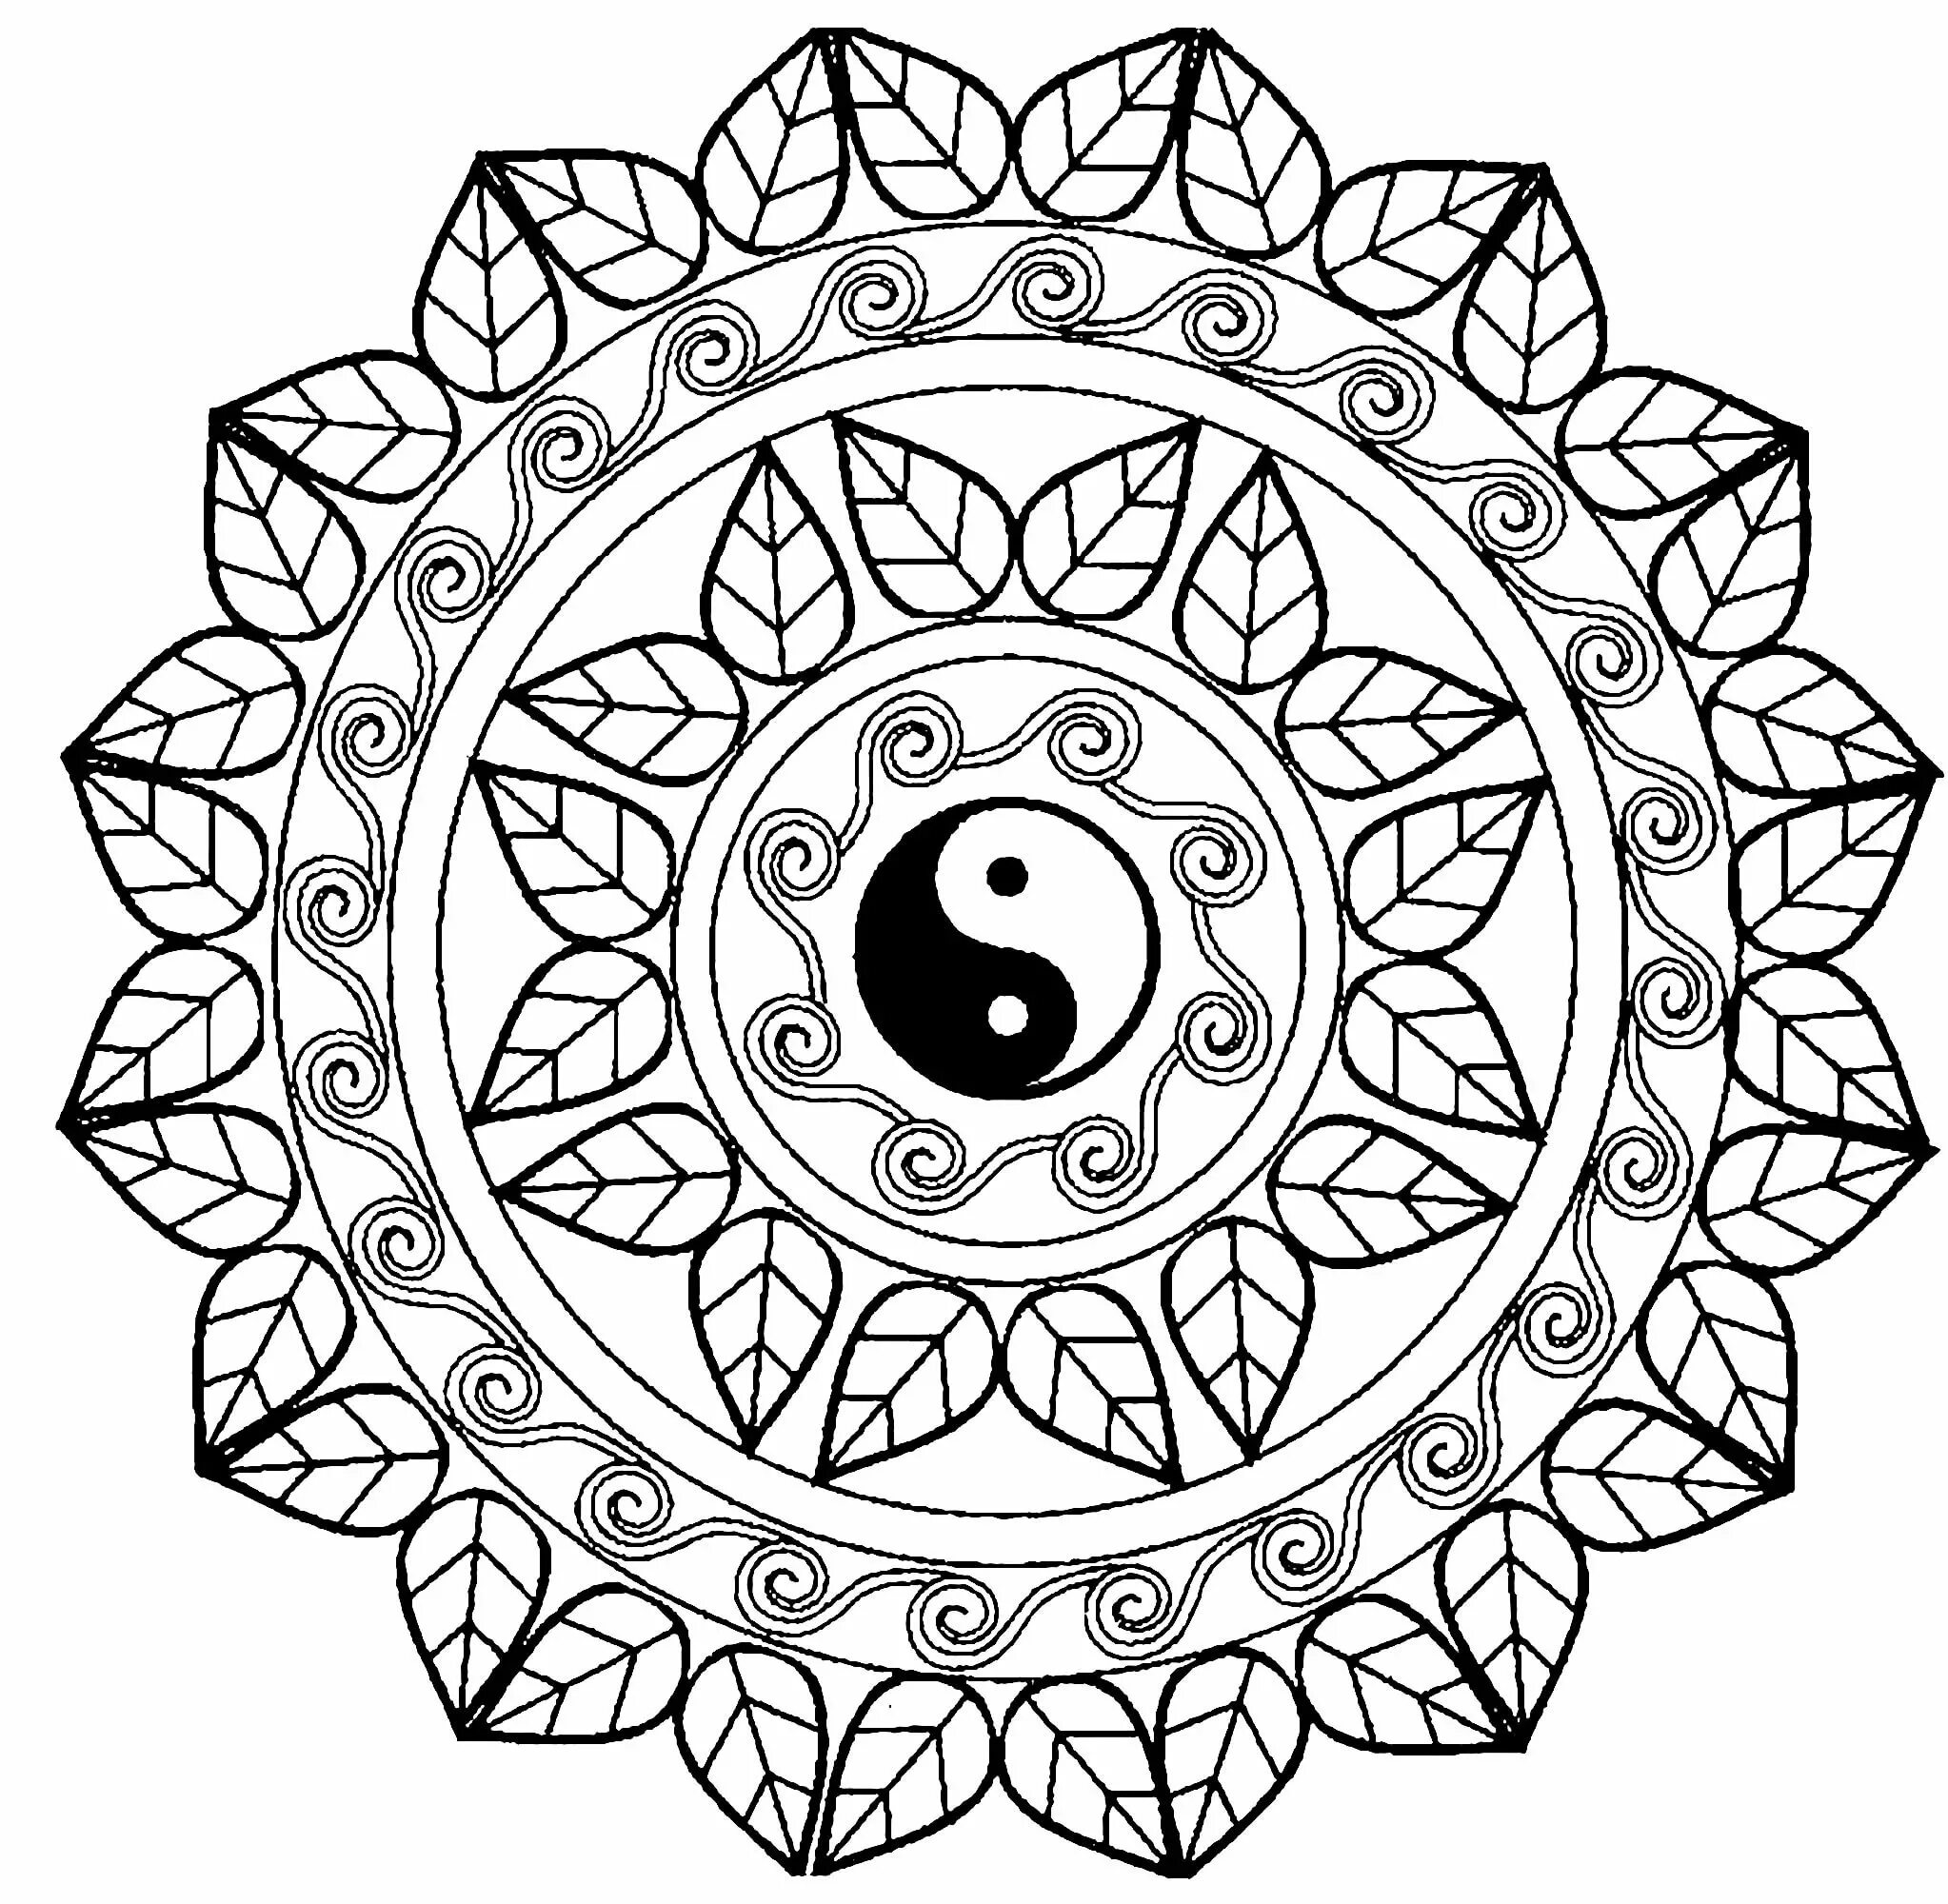 Sublime meditation coloring book